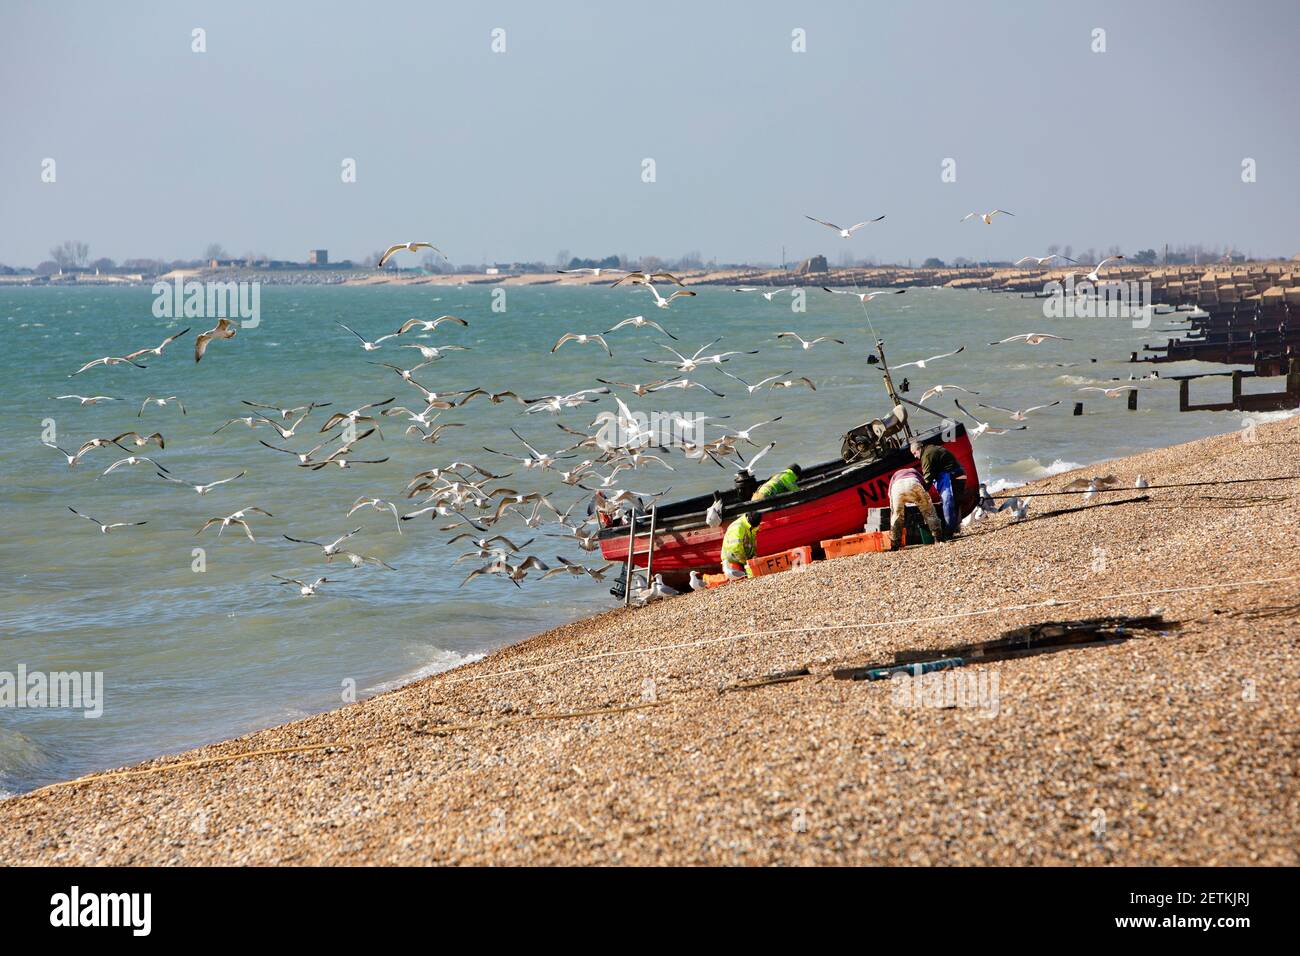 Fishermen unloading their catch on a beach, surrounded by seagulls. Stock Photo